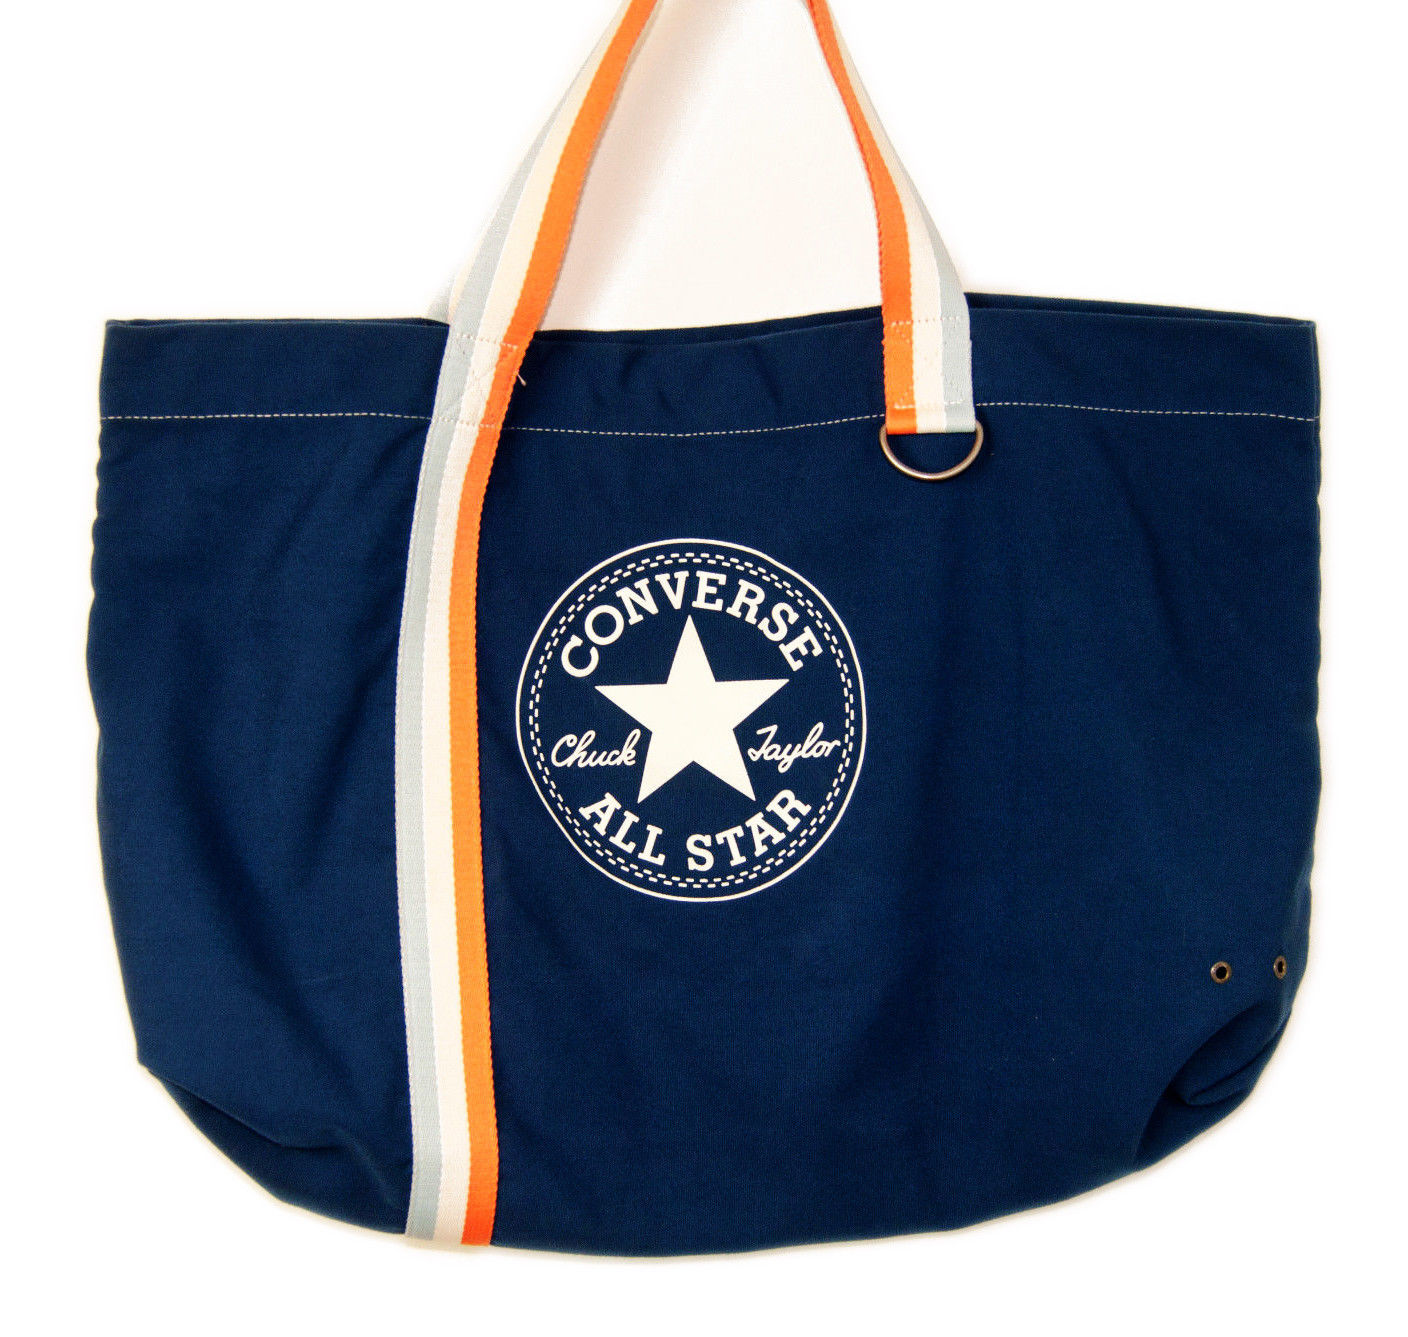 Converse All Star Chuck Taylor Tote Bag 23" x 17" Athletic Travel Gym Bag Tote - $29.05